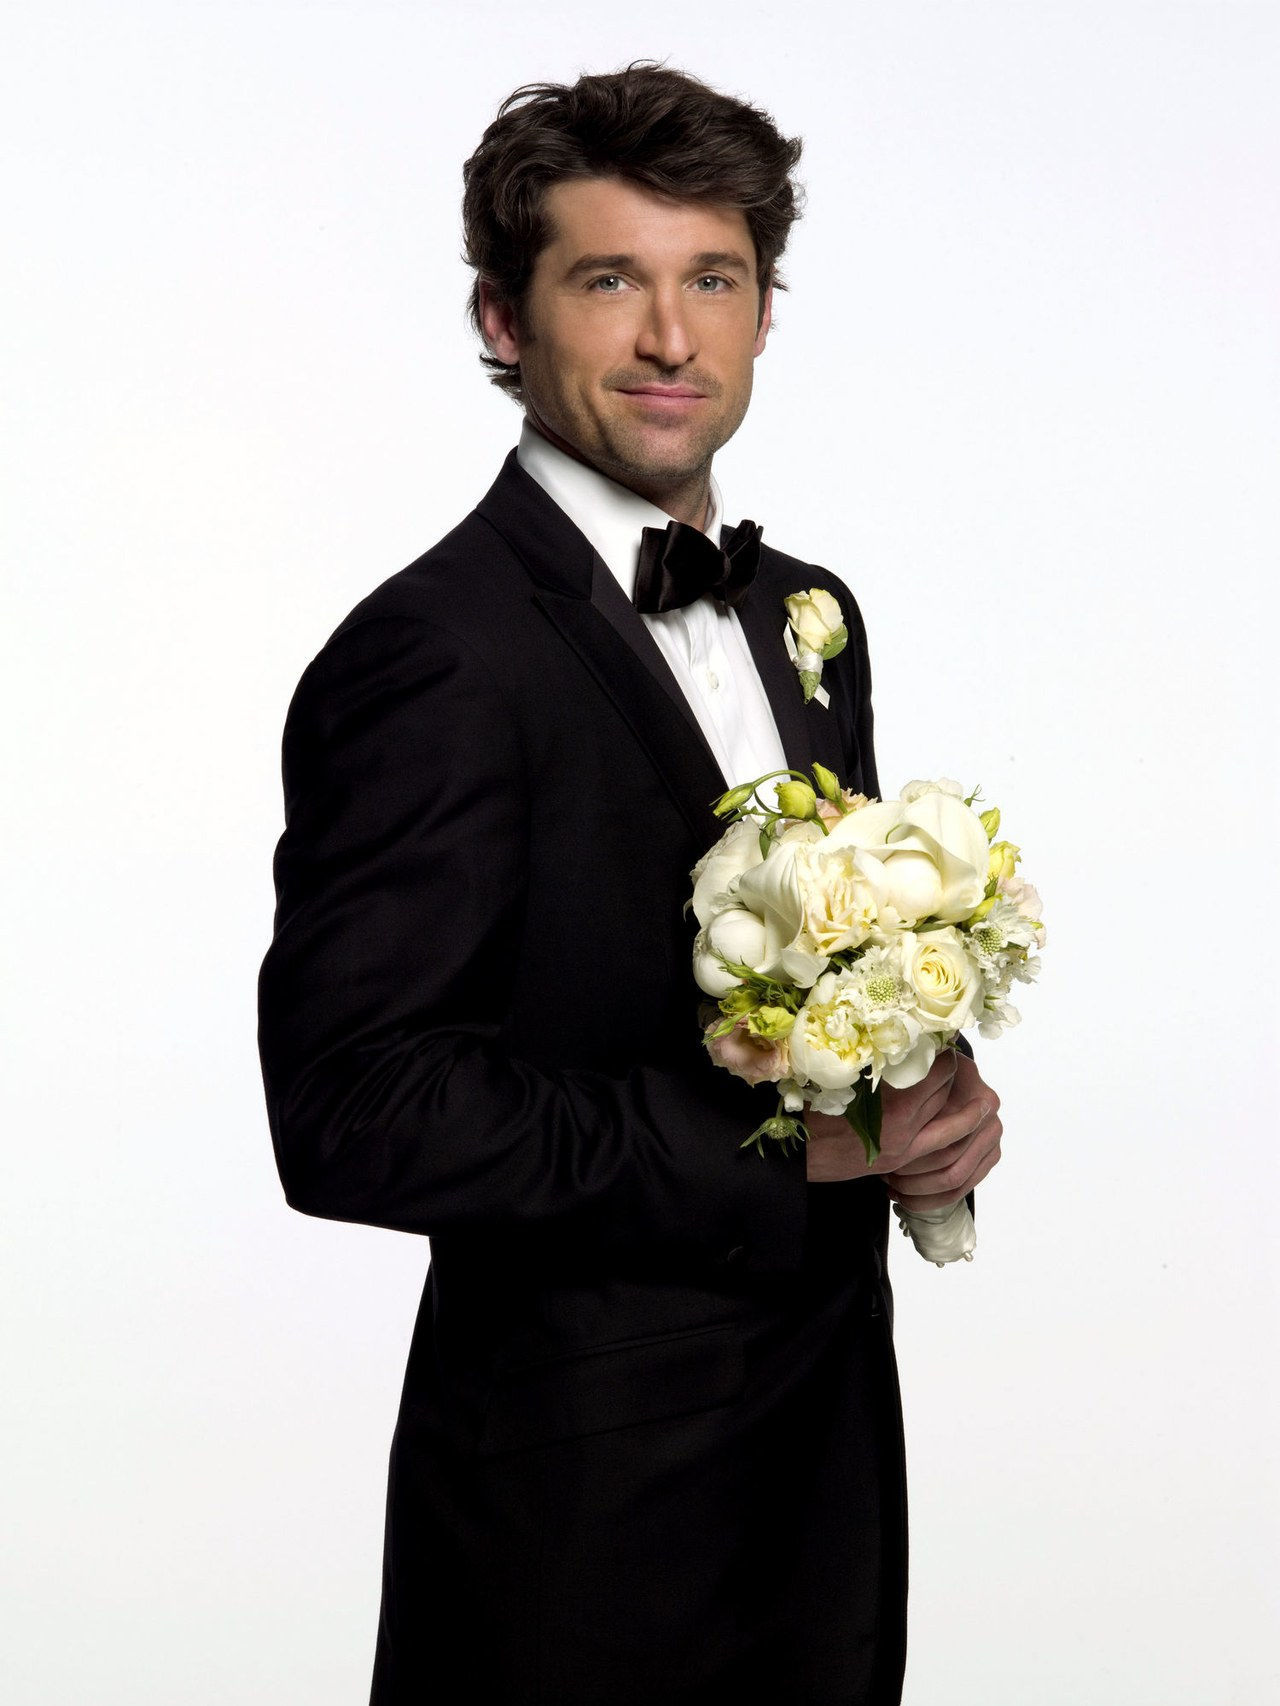 hecho of honor patrick dempsey